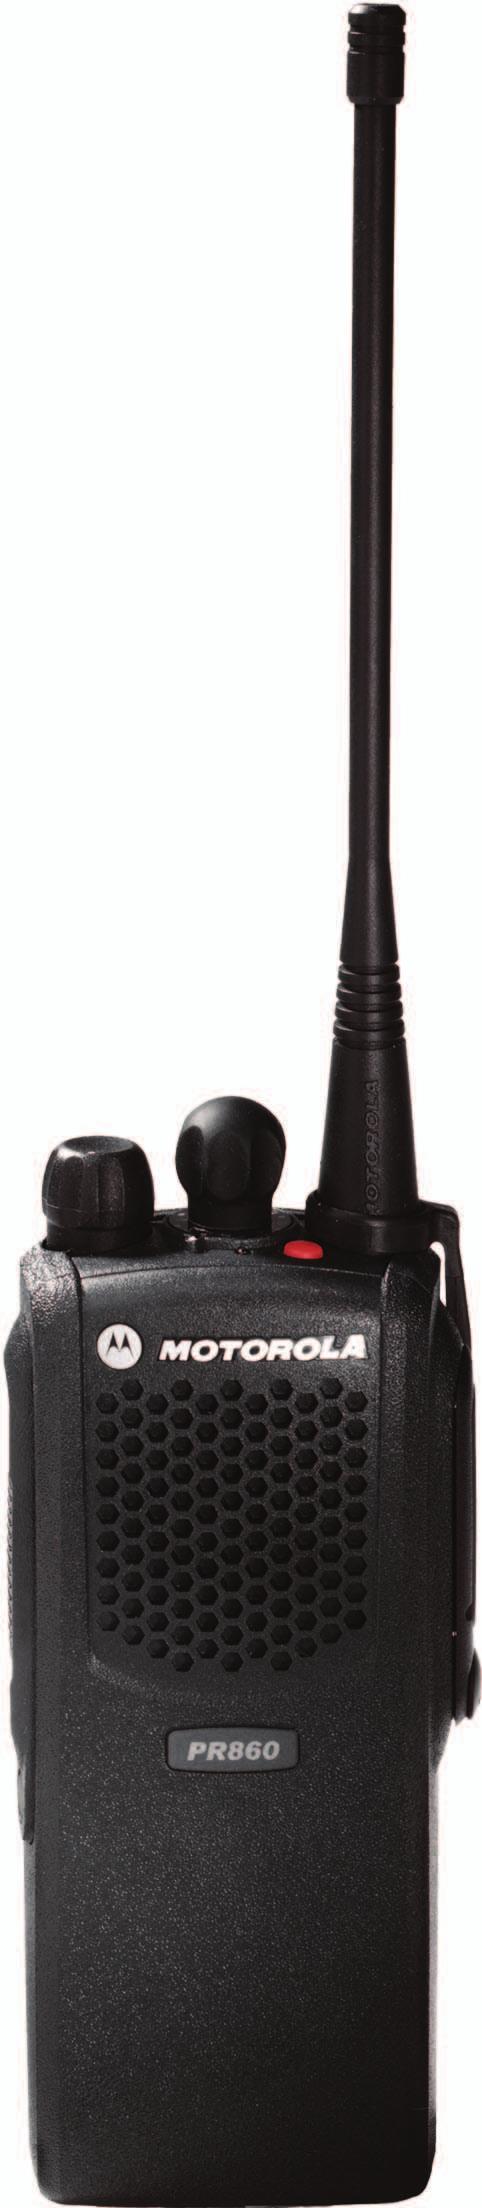 PR860 Professional Series Two-Way Radios and Accessories Welcome to the Community!